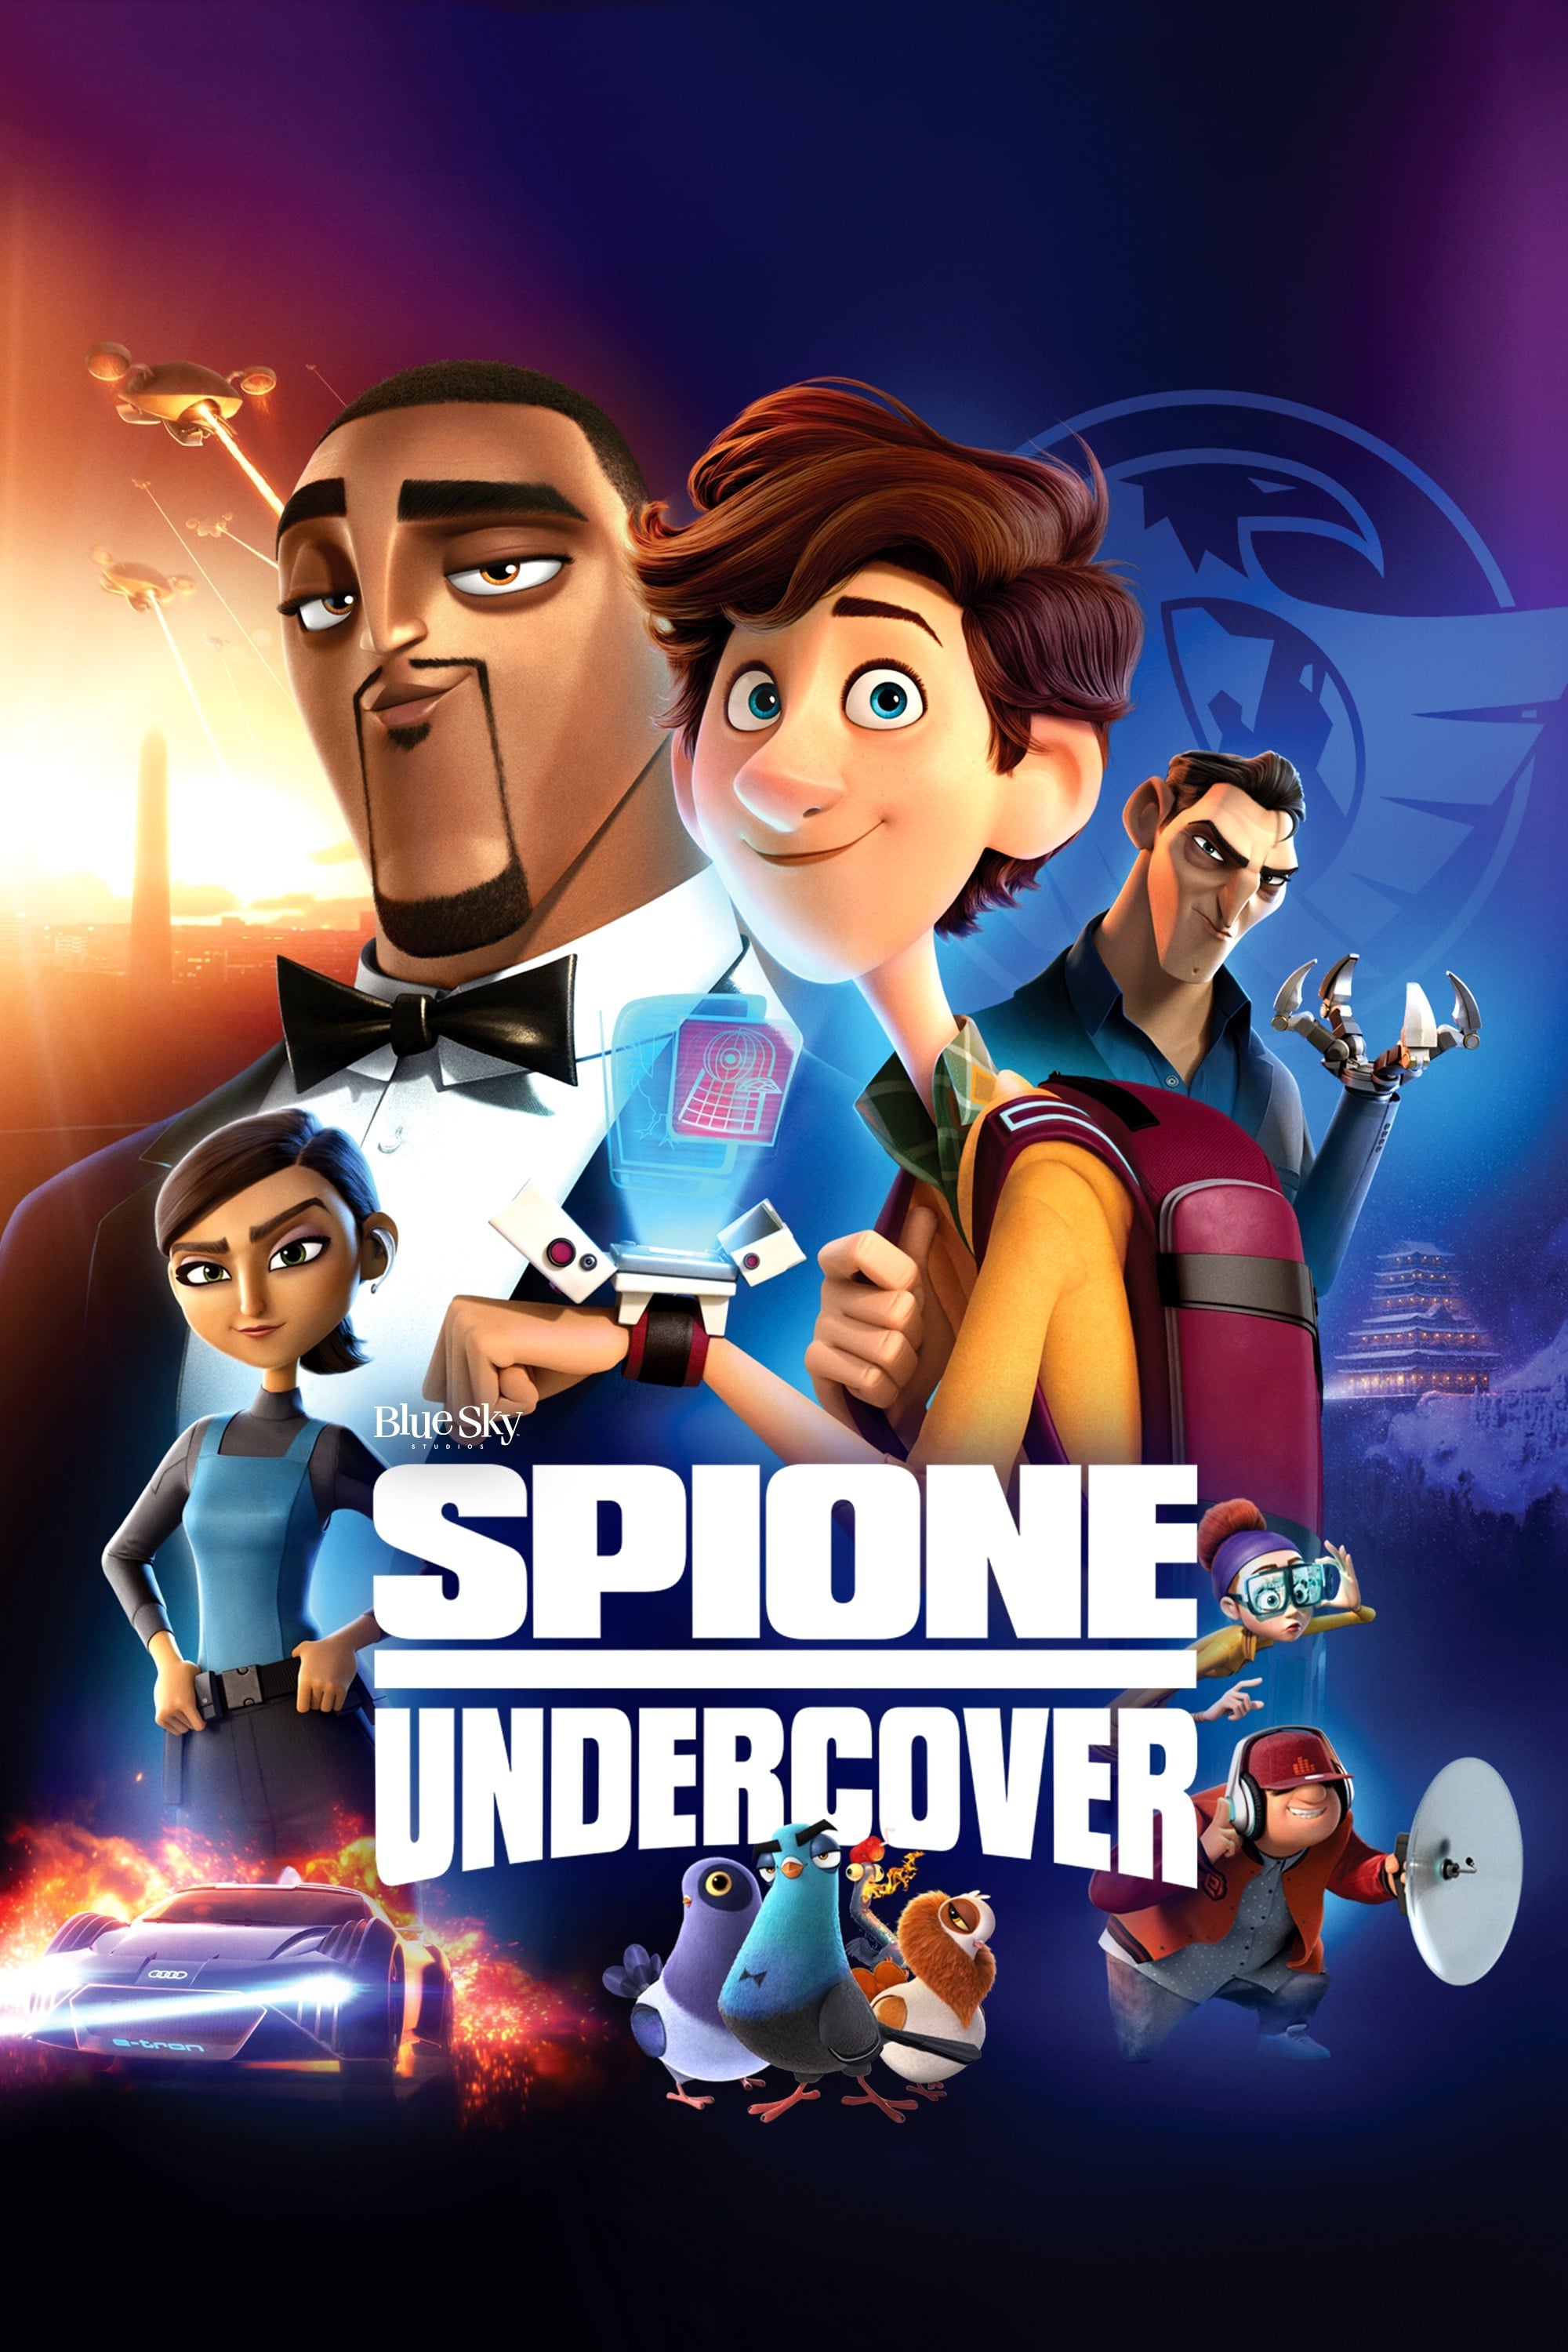 Spies in Disguise (2019)